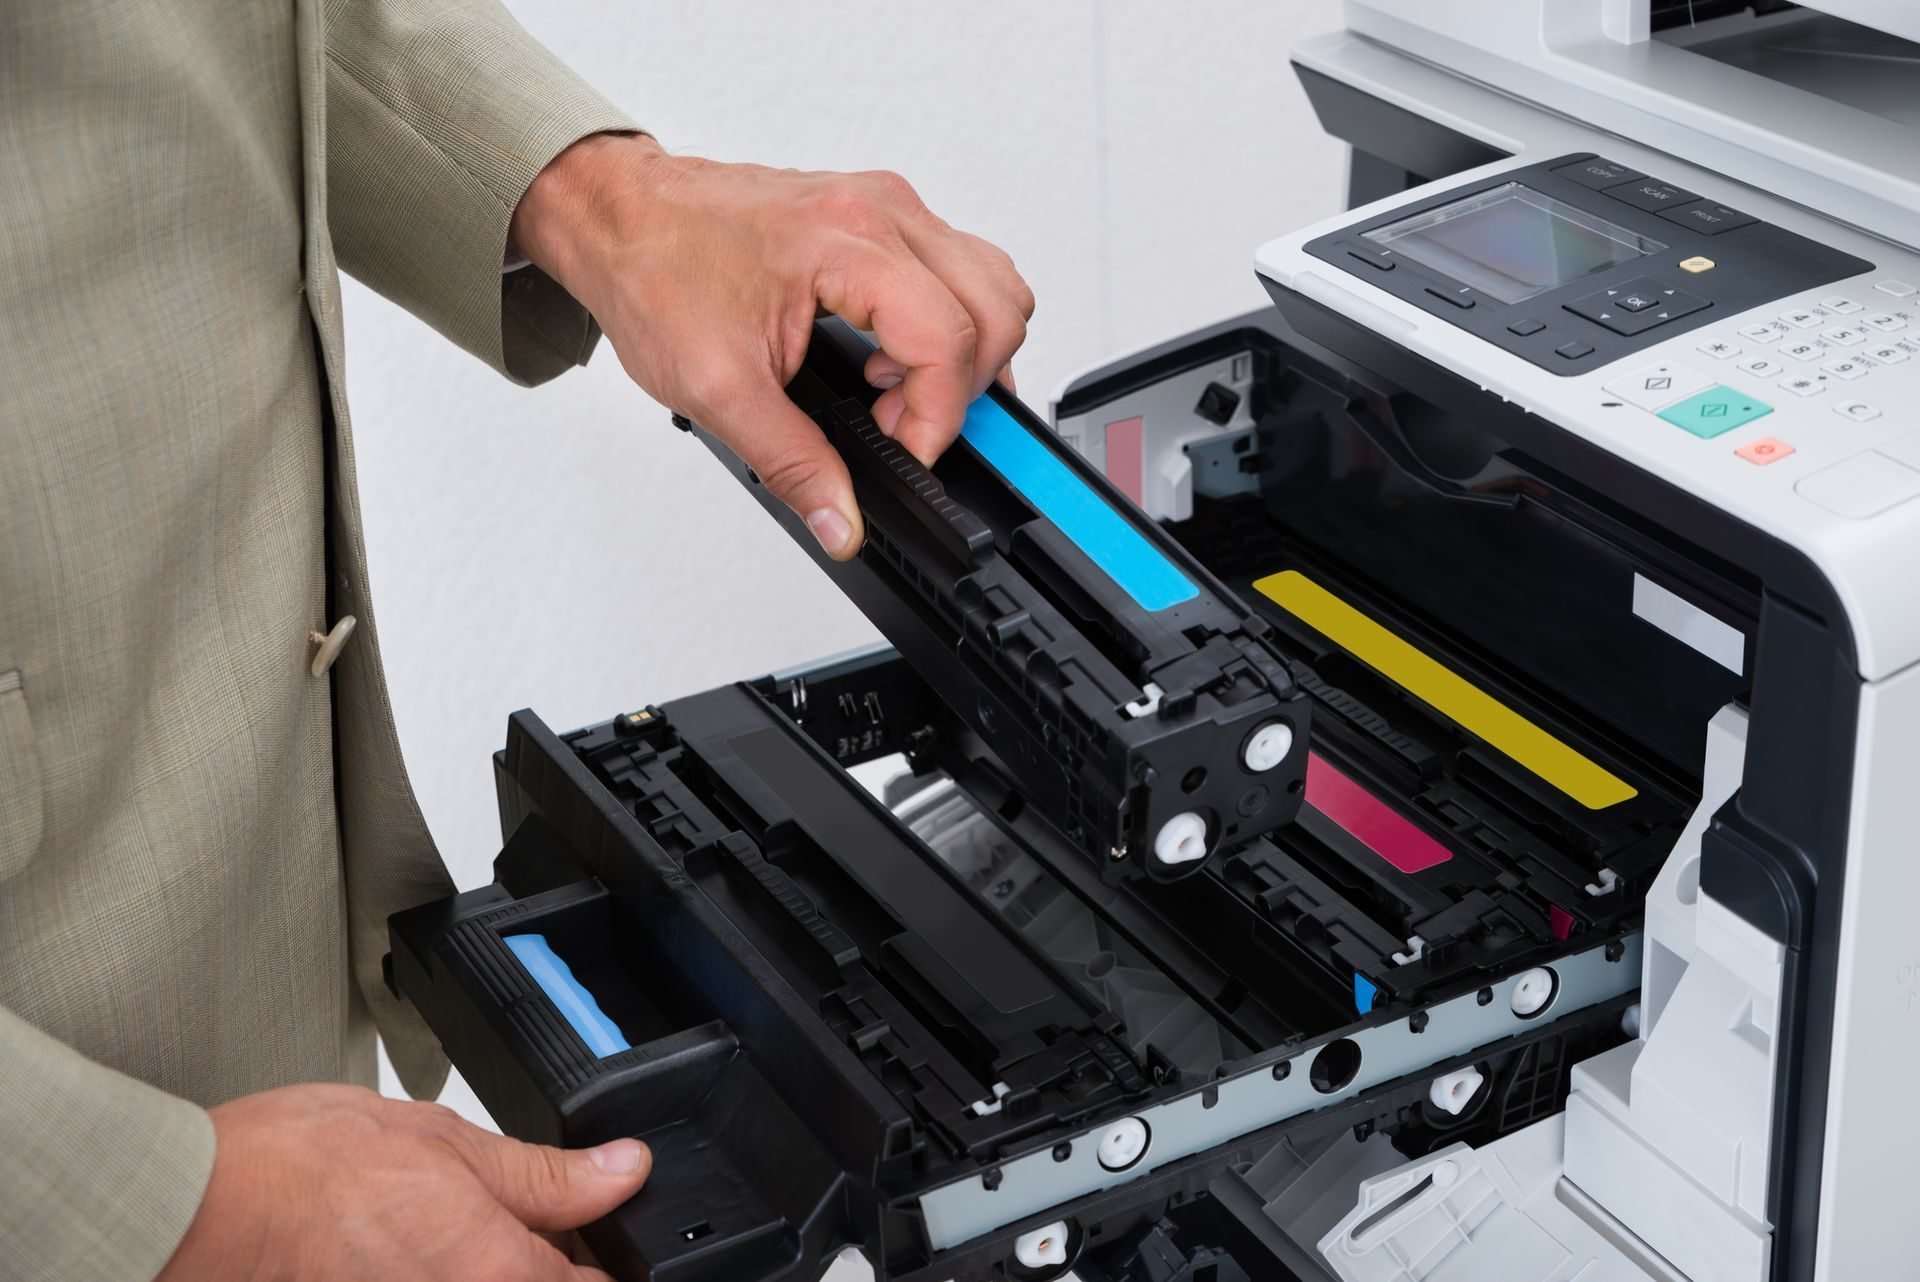 Sale of ink and cartridges for office printers in Israel